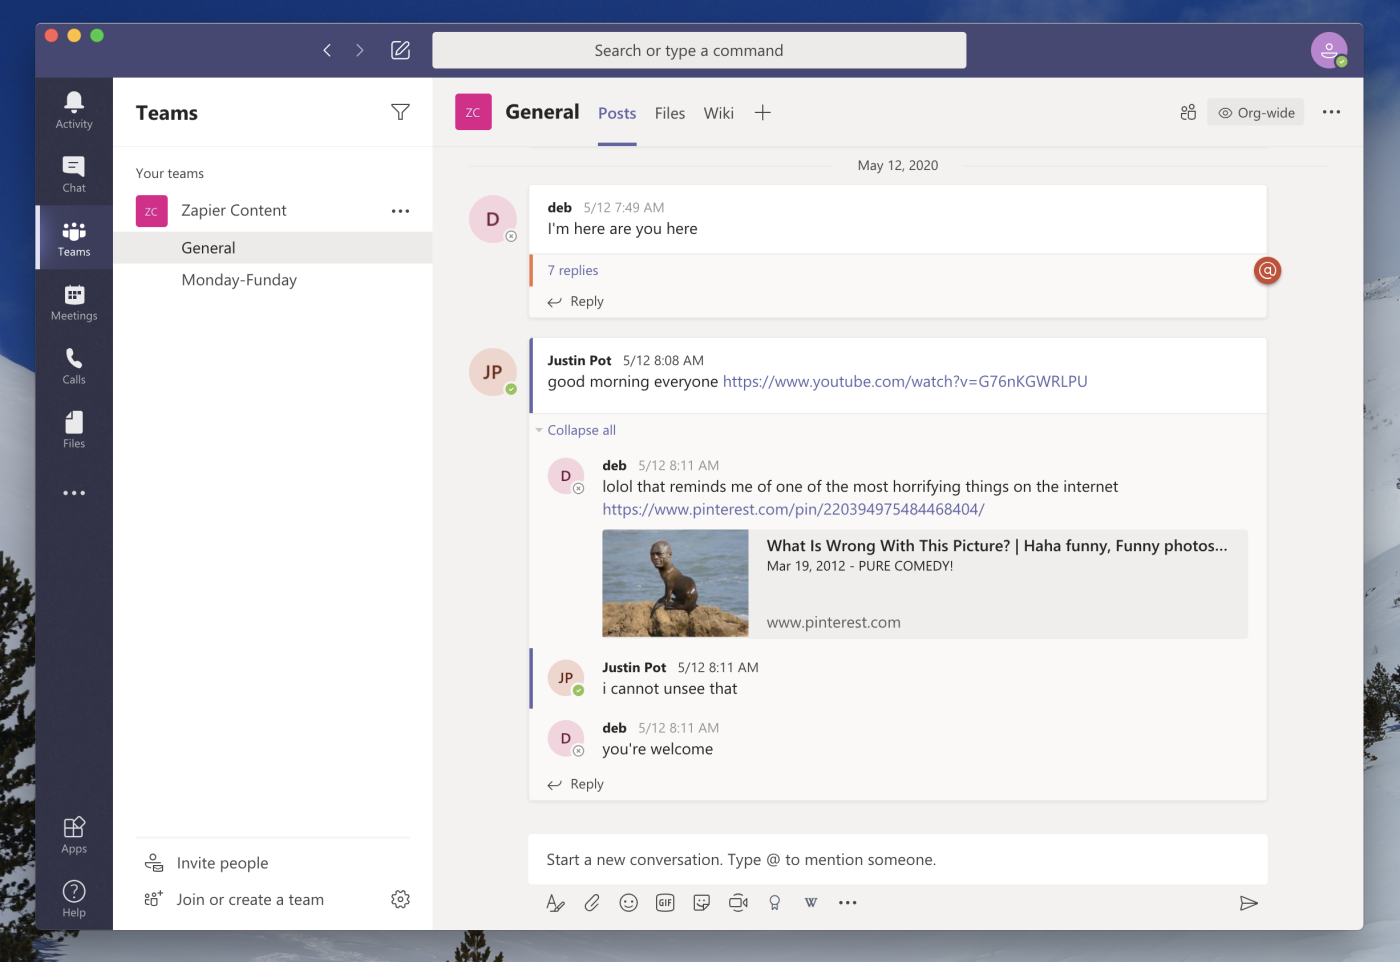 Microsoft Teams, our pick for the best team chat app for large organizations broken down into teams